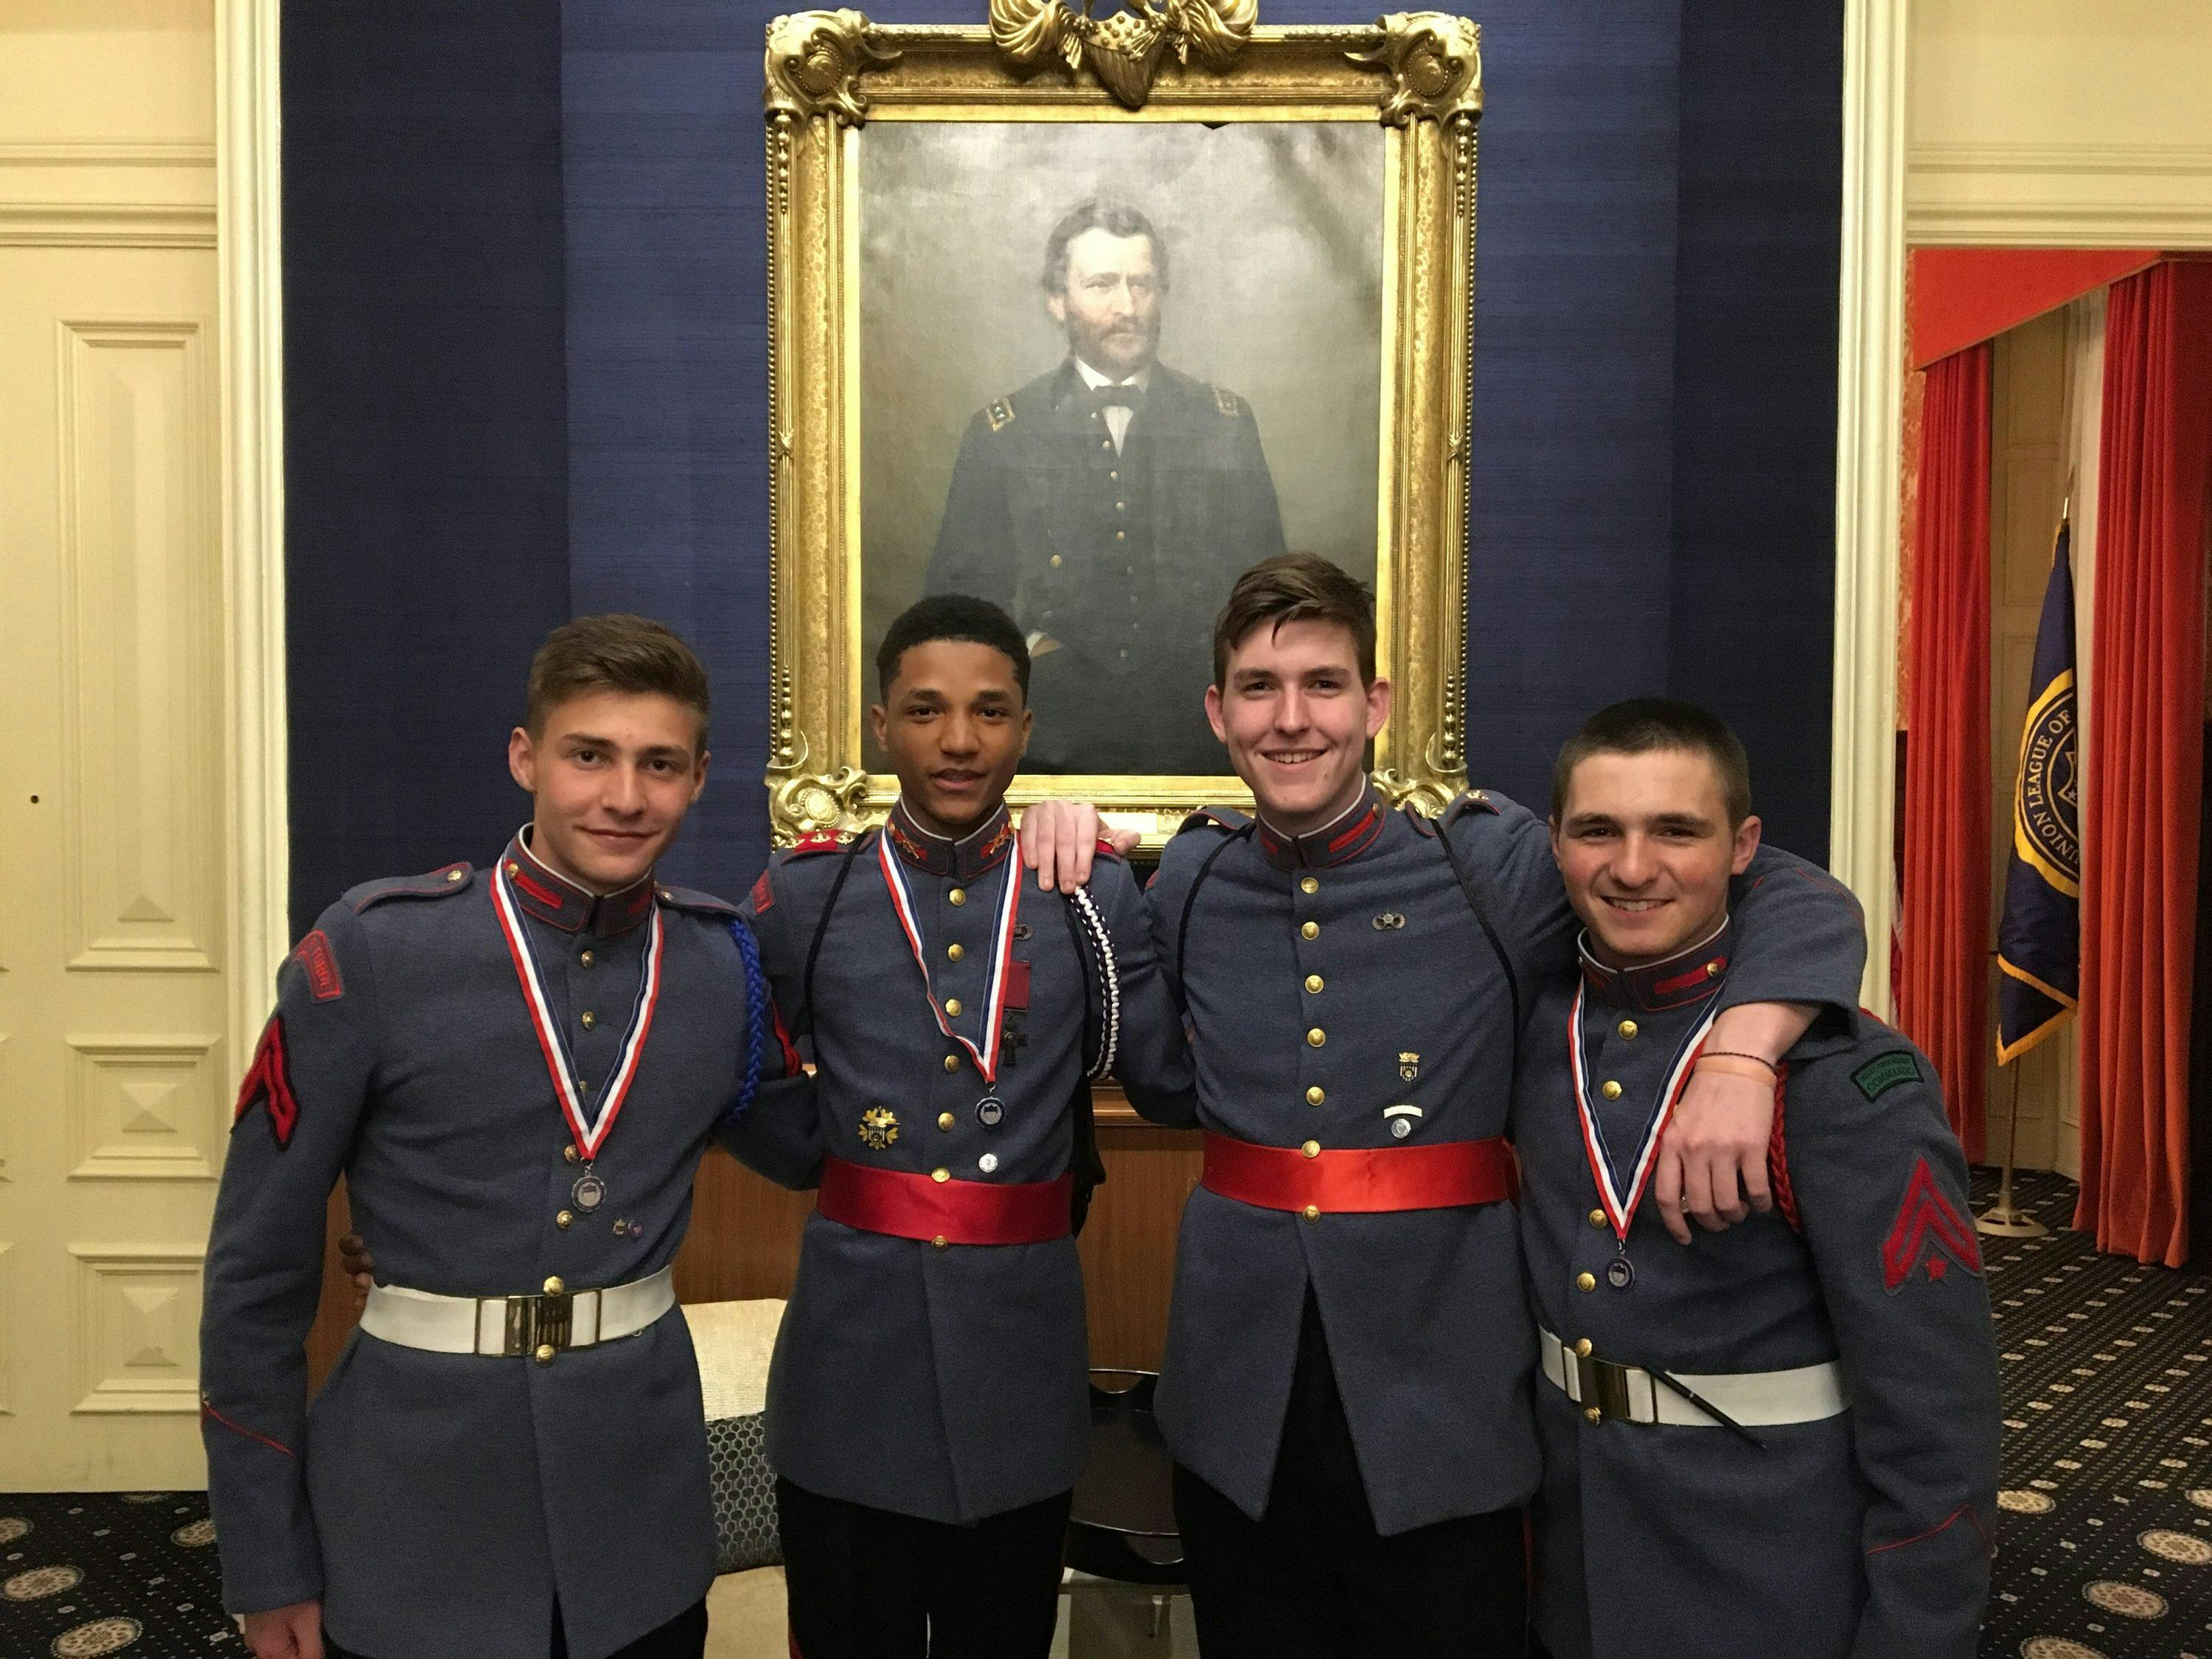 Valley Forge Military Academy Open House for Prospective Families